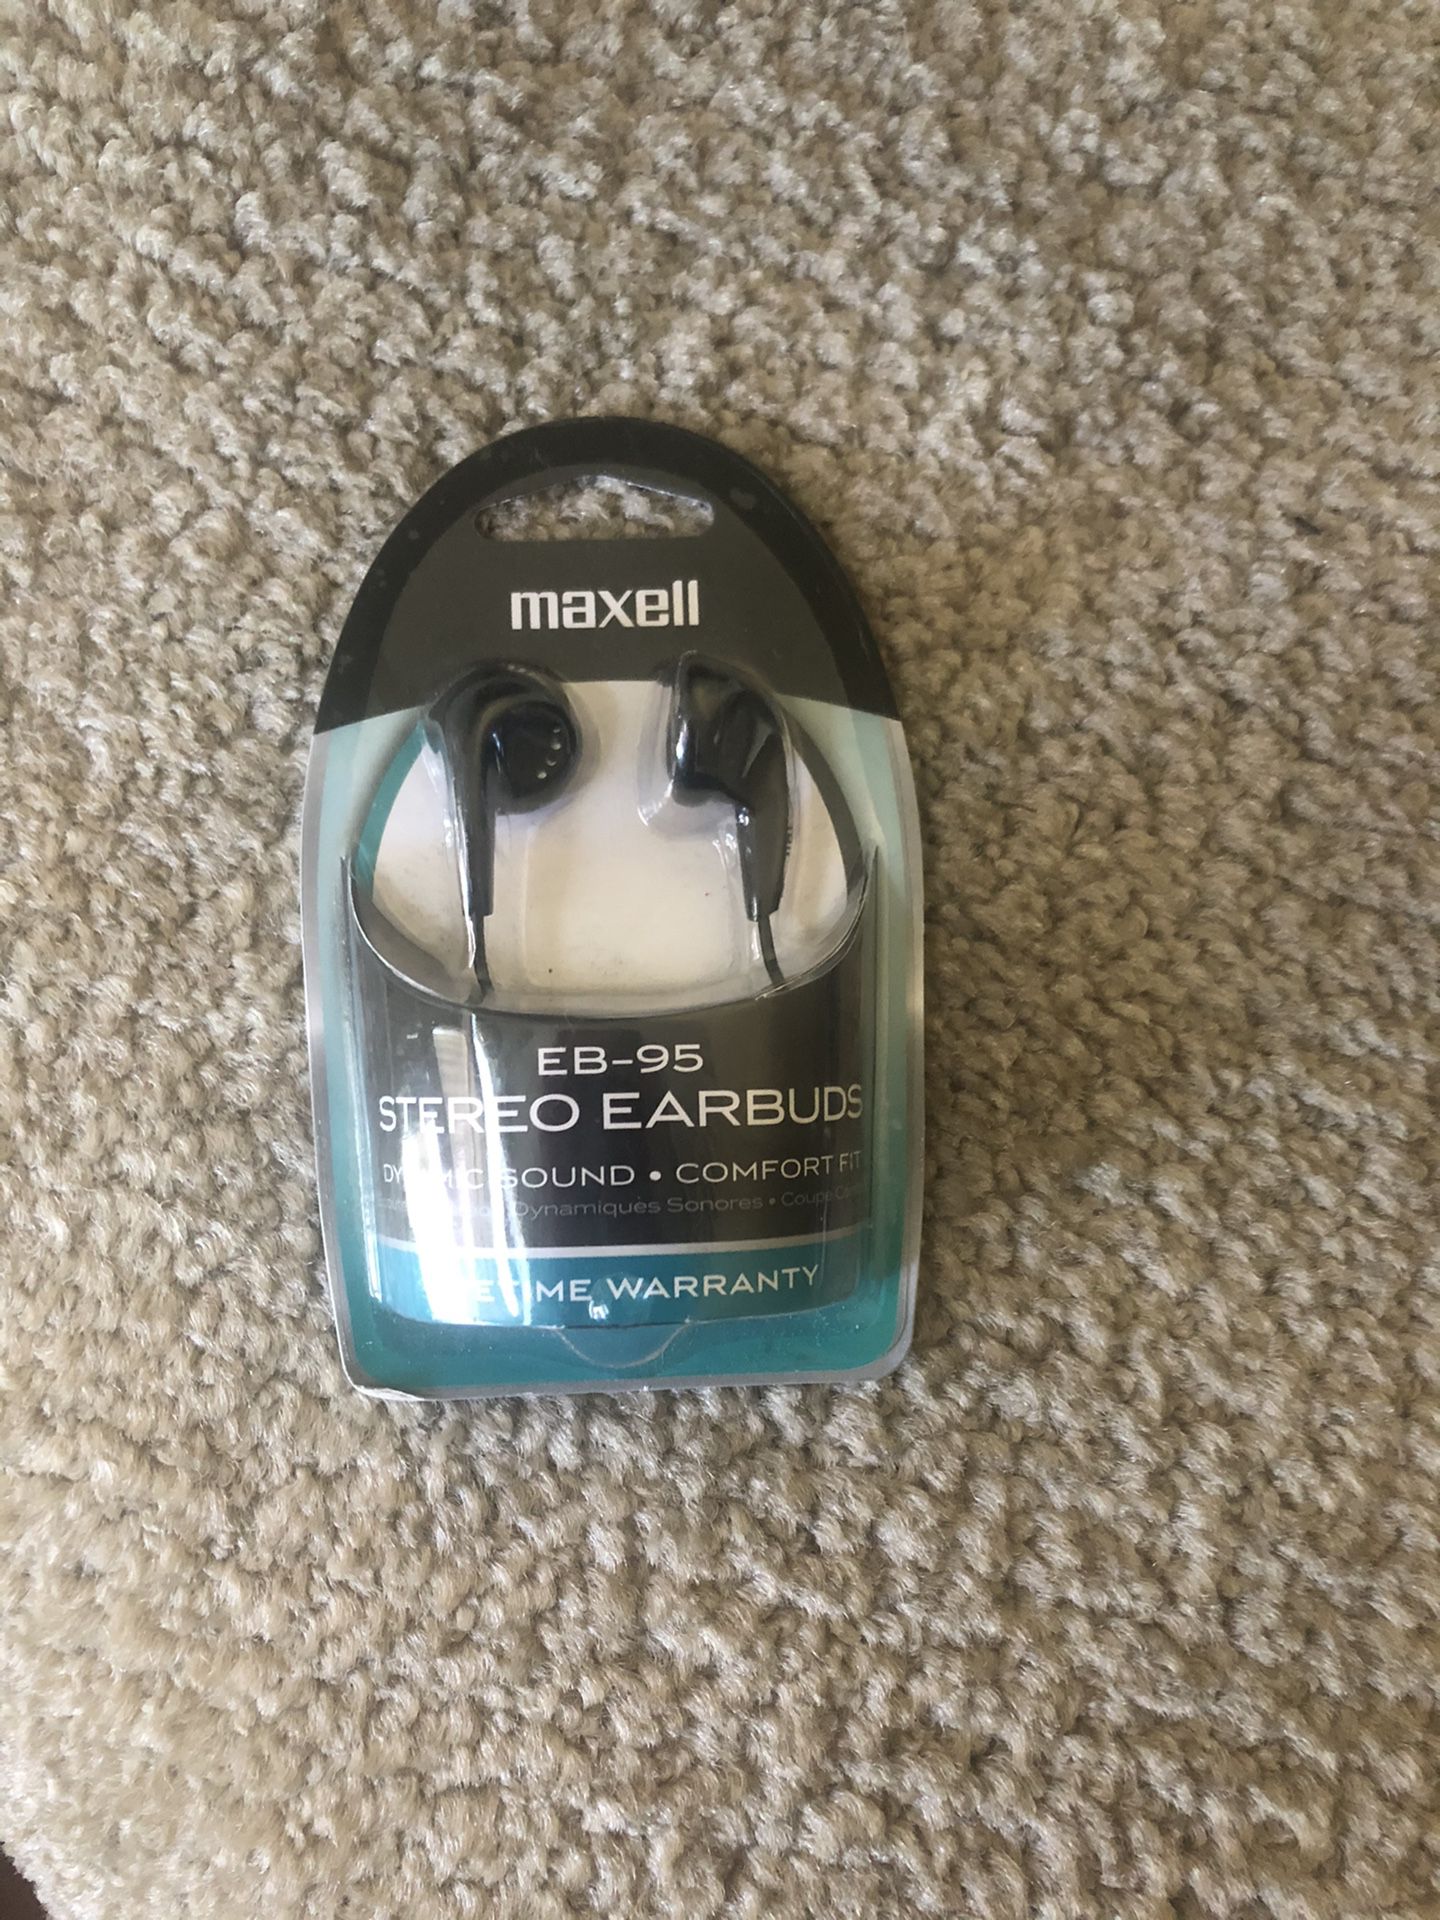 Maxwell stereo earbuds